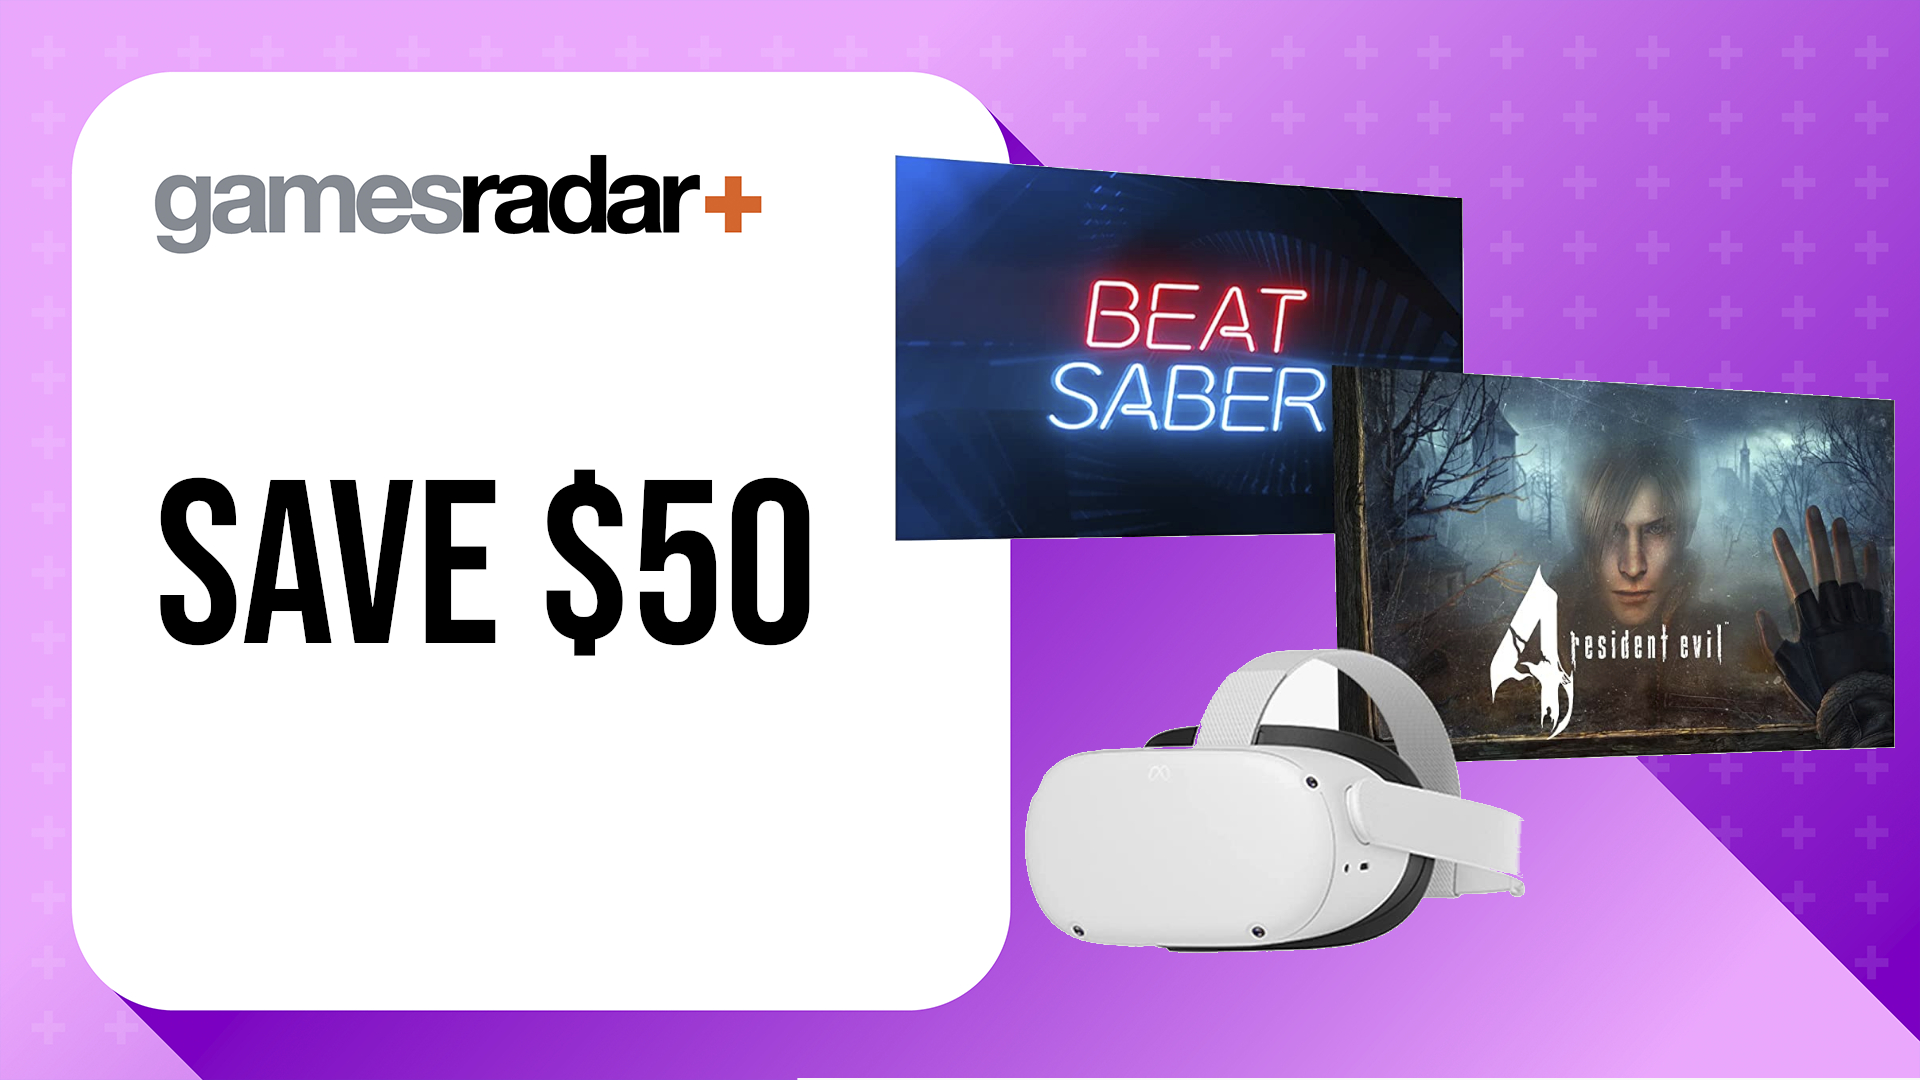 Black Friday Oculus Quest 2 deals with headset, Beat Saber, and Resident Evil 4